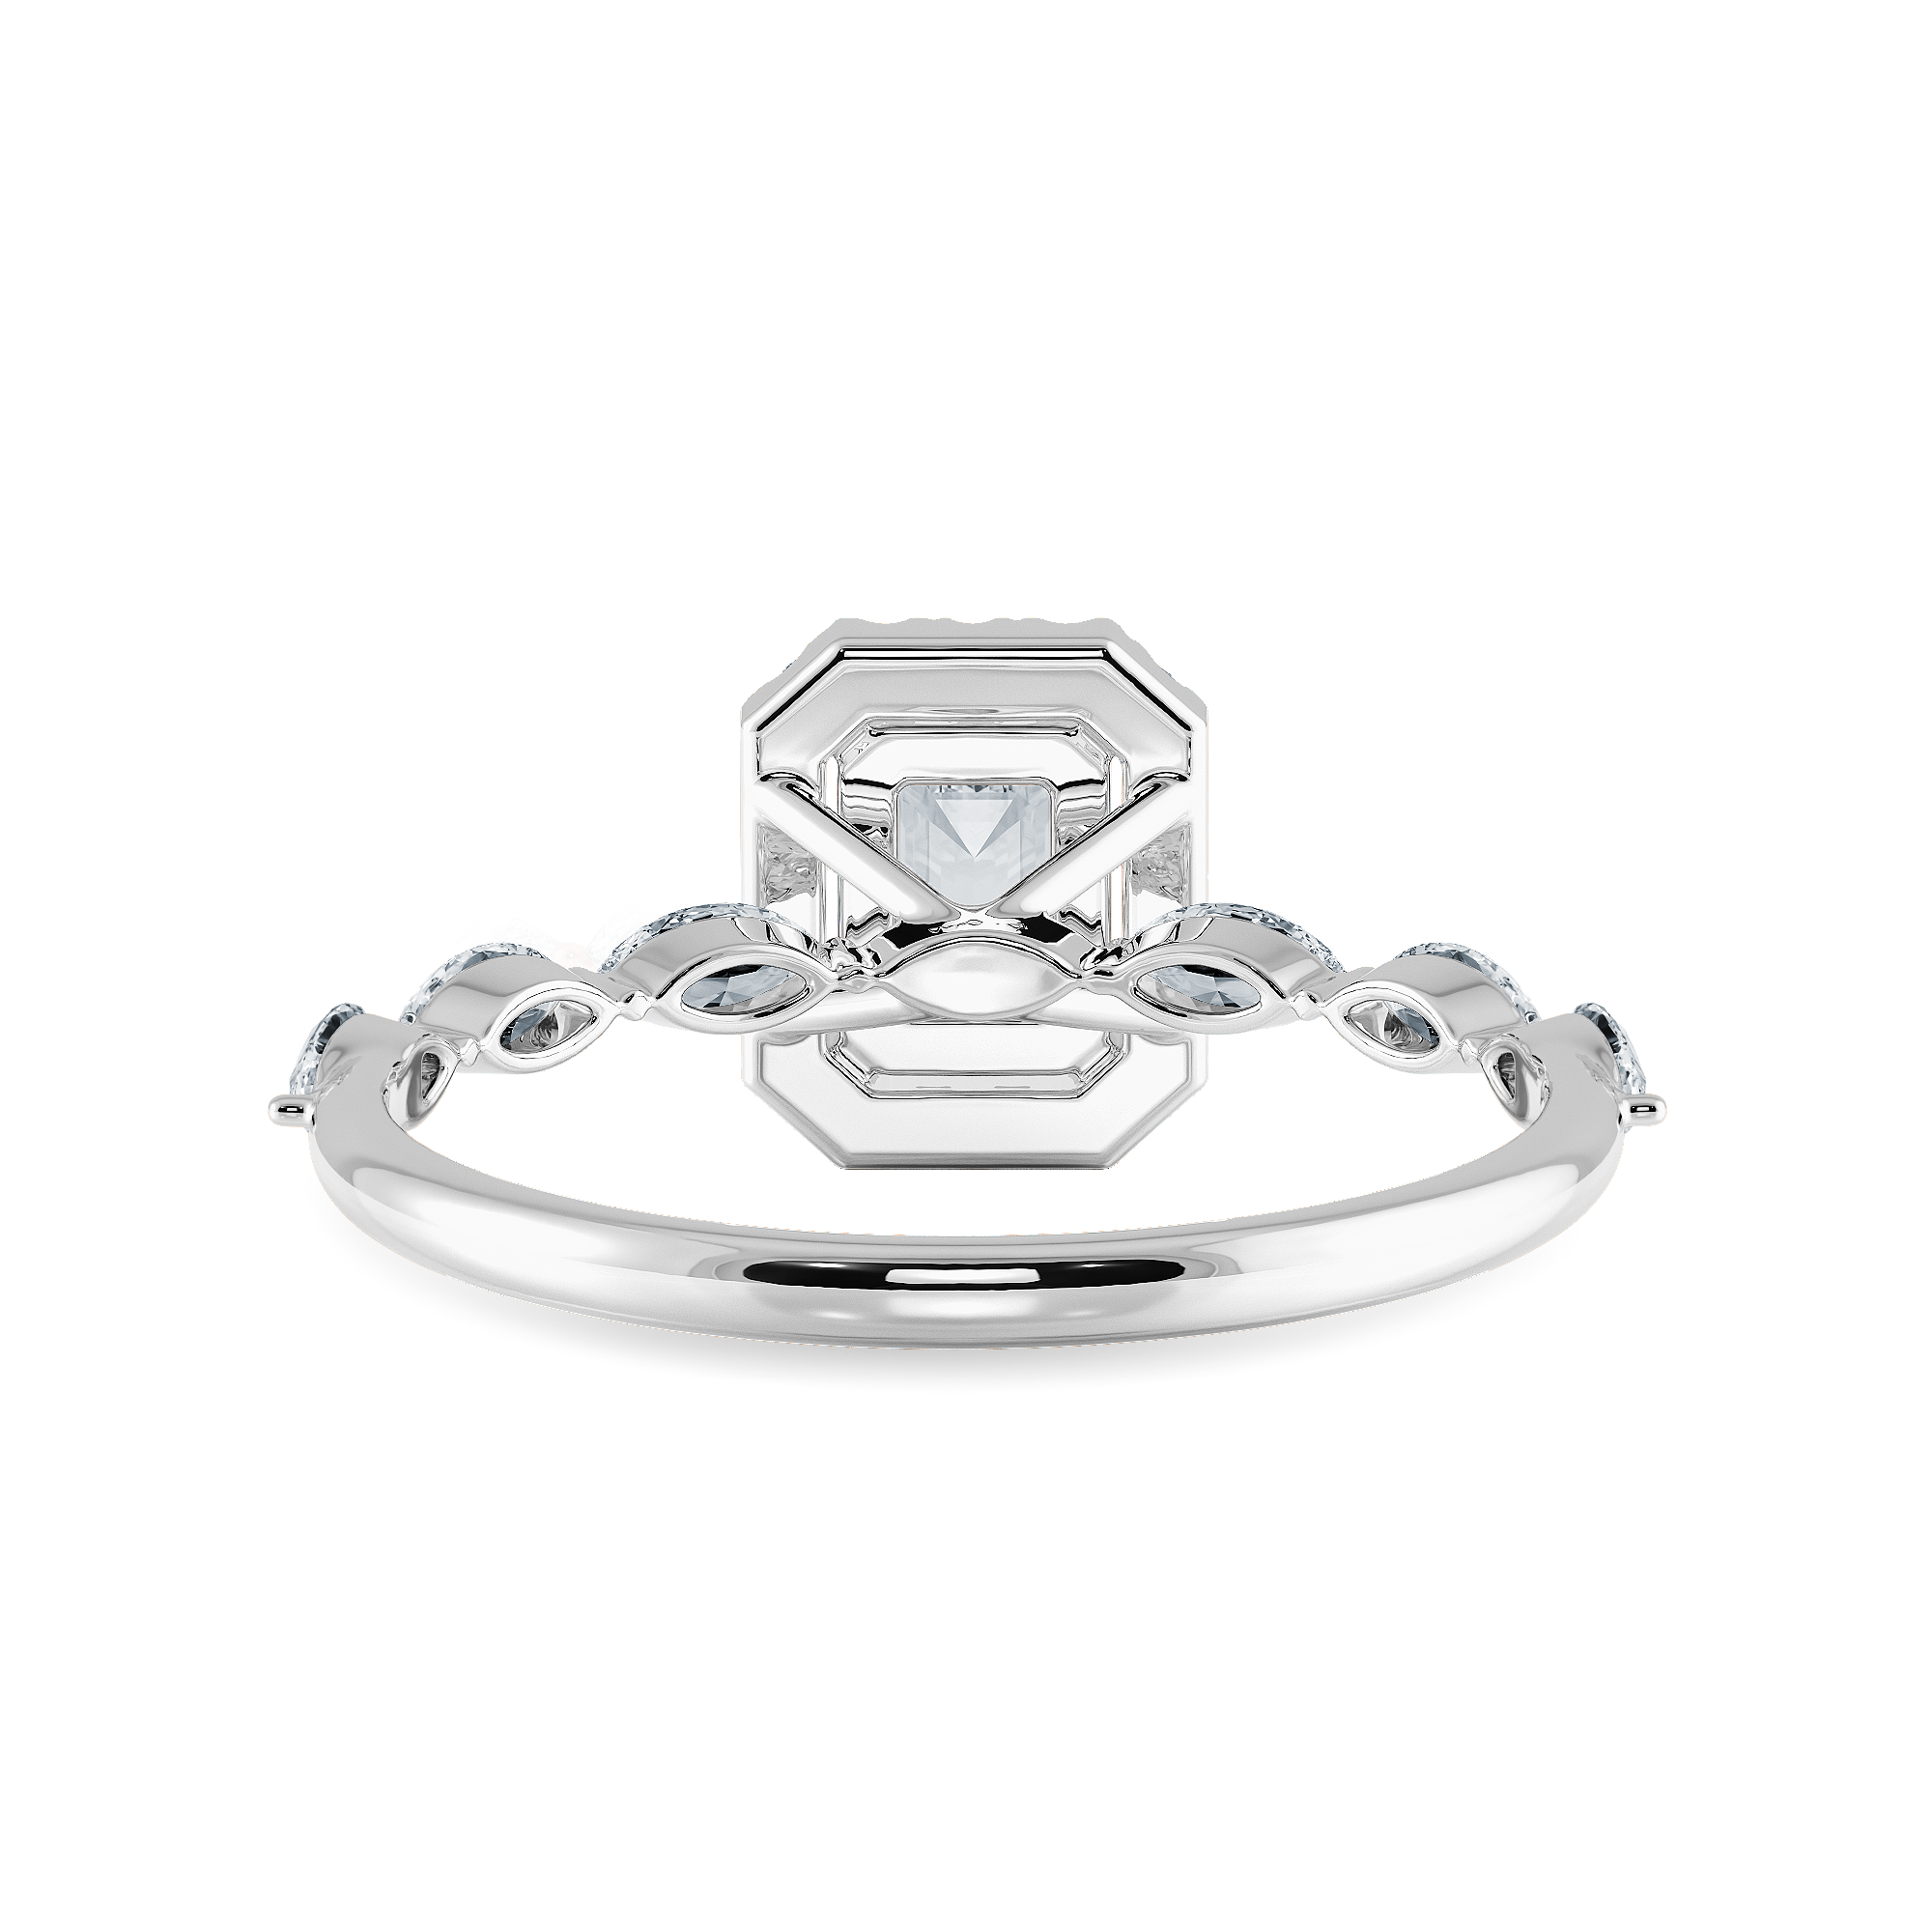 50-Pointer Emerald Cut Solitaire Halo Diamonds with Marquise Cut Diamonds Platinum Ring JL PT 1272-A